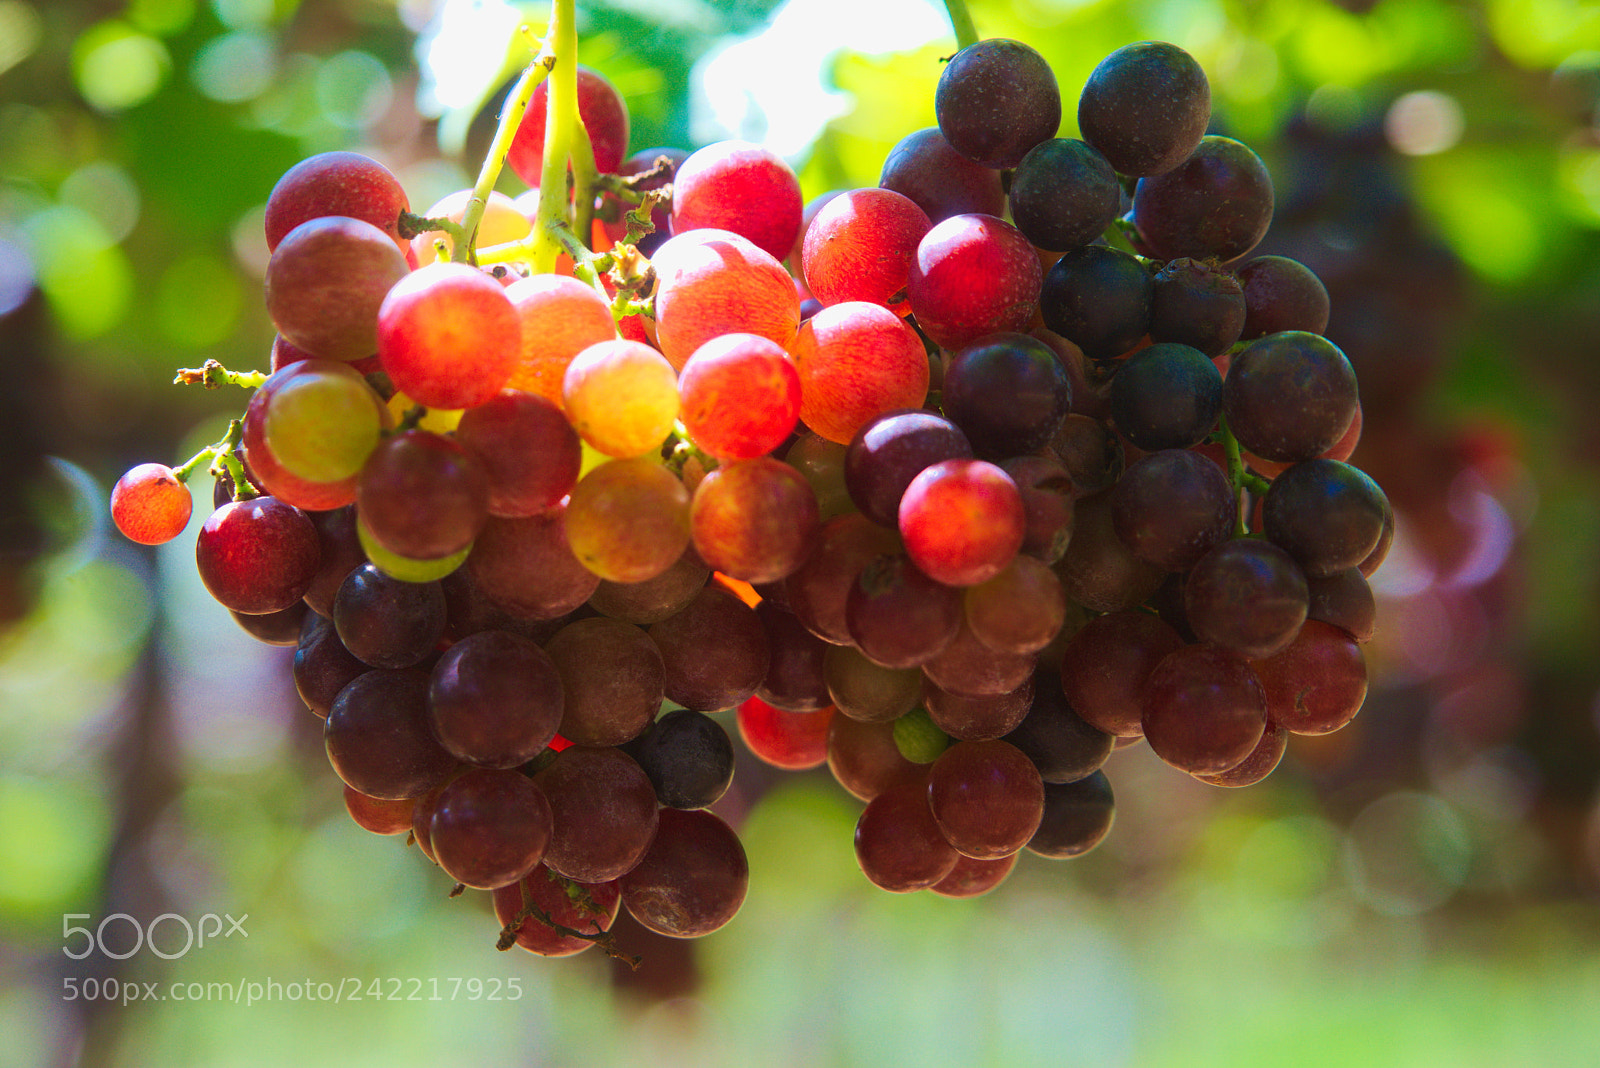 Sony a7 sample photo. Grapes photography